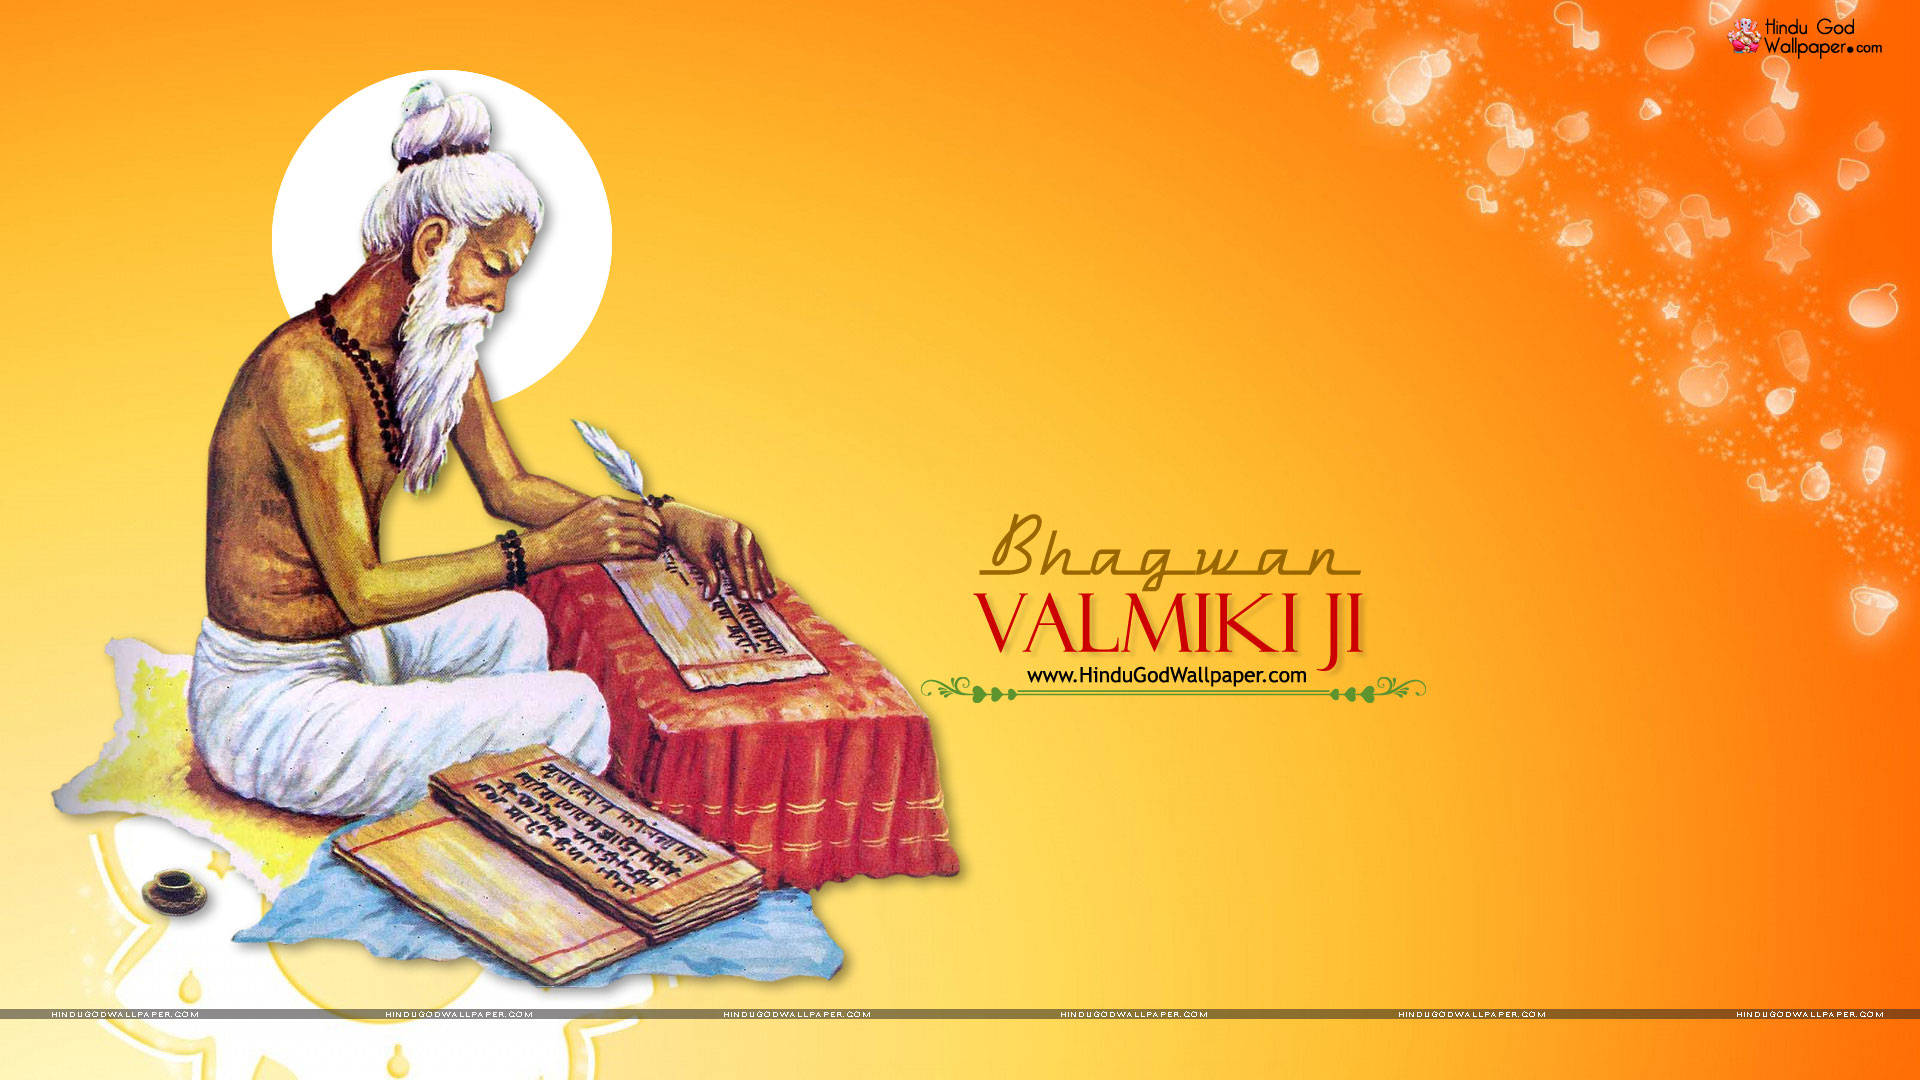 Caption: The Enlightened Saint Valmiki Composing His Renowned Epic Background